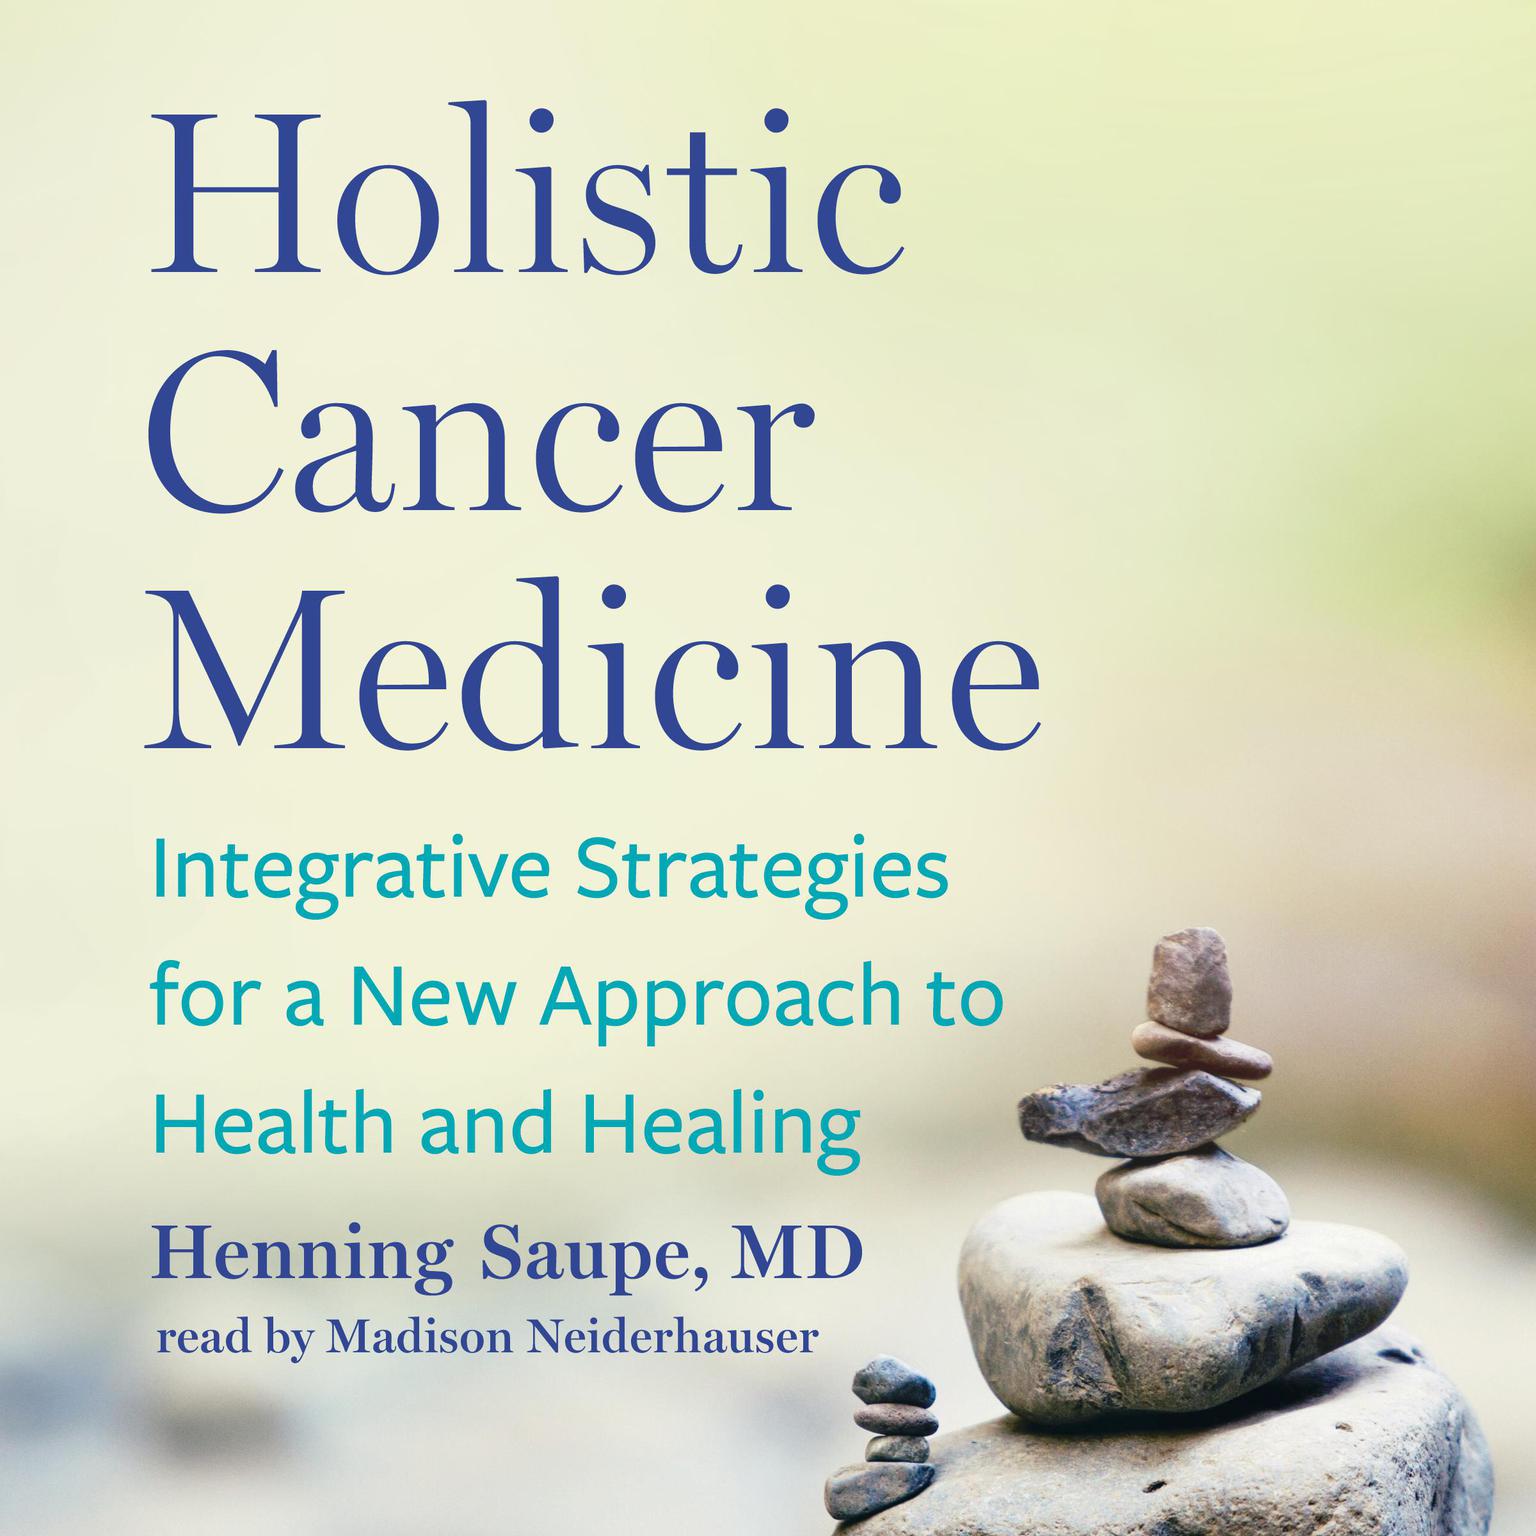 Holistic Cancer Medicine: Integrative Strategies for a New Approach to Health and Healing Audiobook, by Henning Saupe